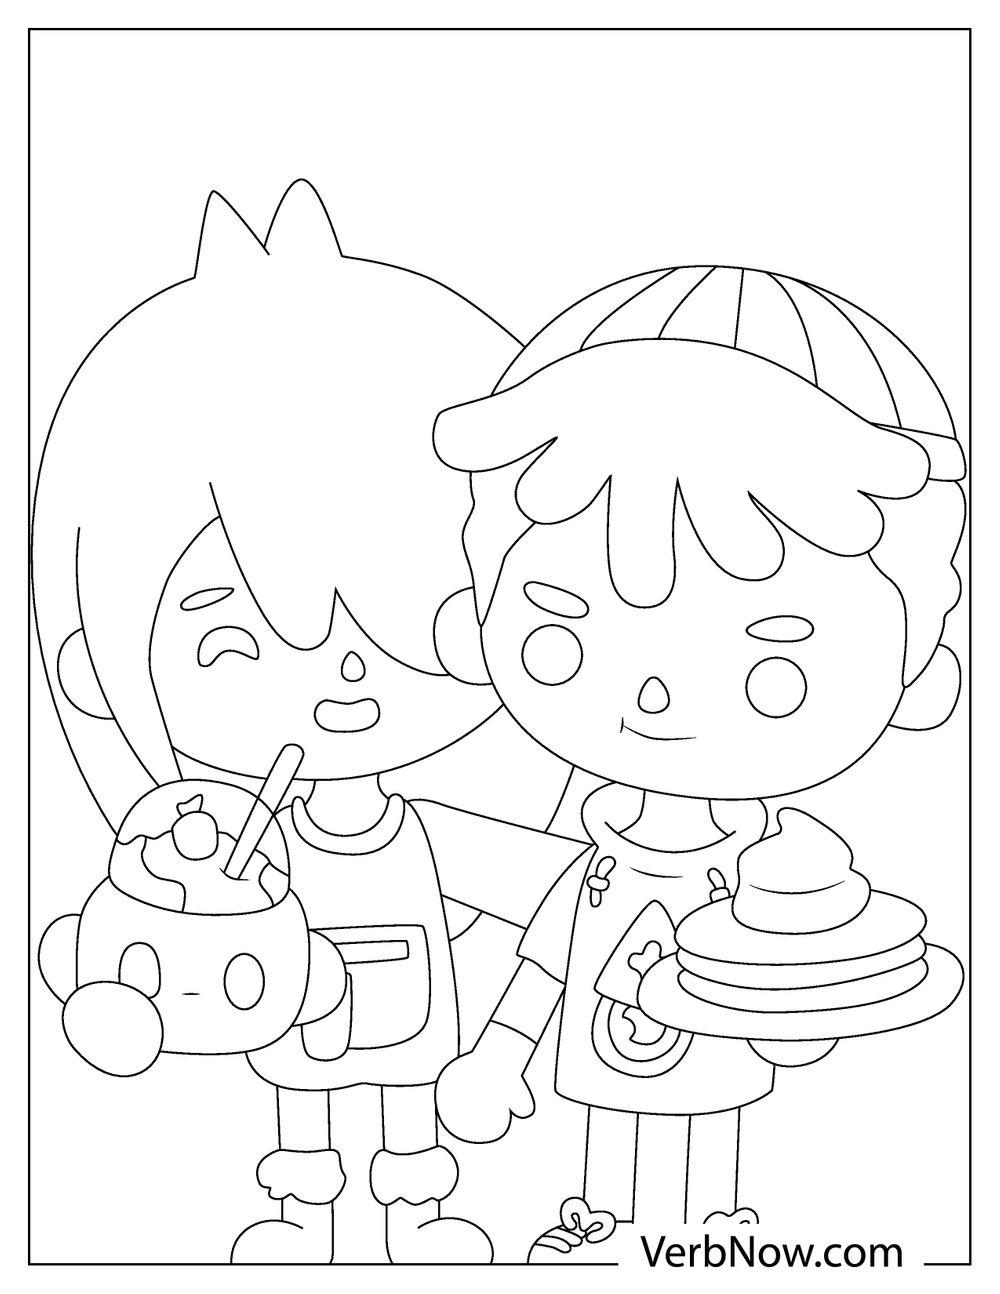 Free TOCA BOCA Coloring Pages & Book for Download (Printable PDF) - VerbNow